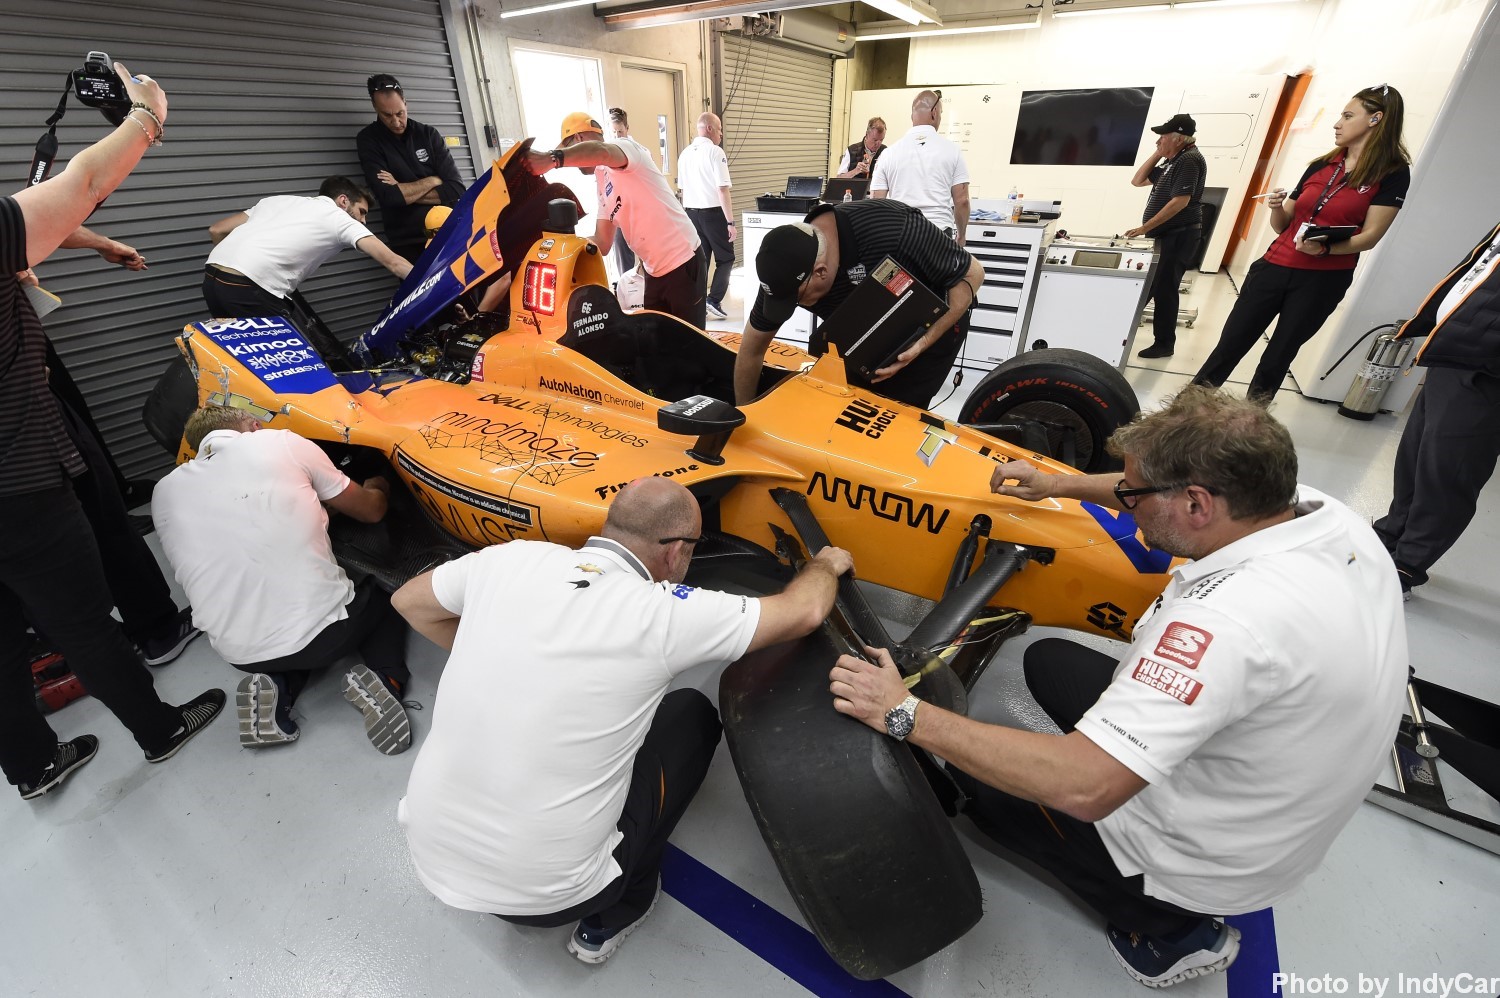 Alonso's team has to fix the car he crashed